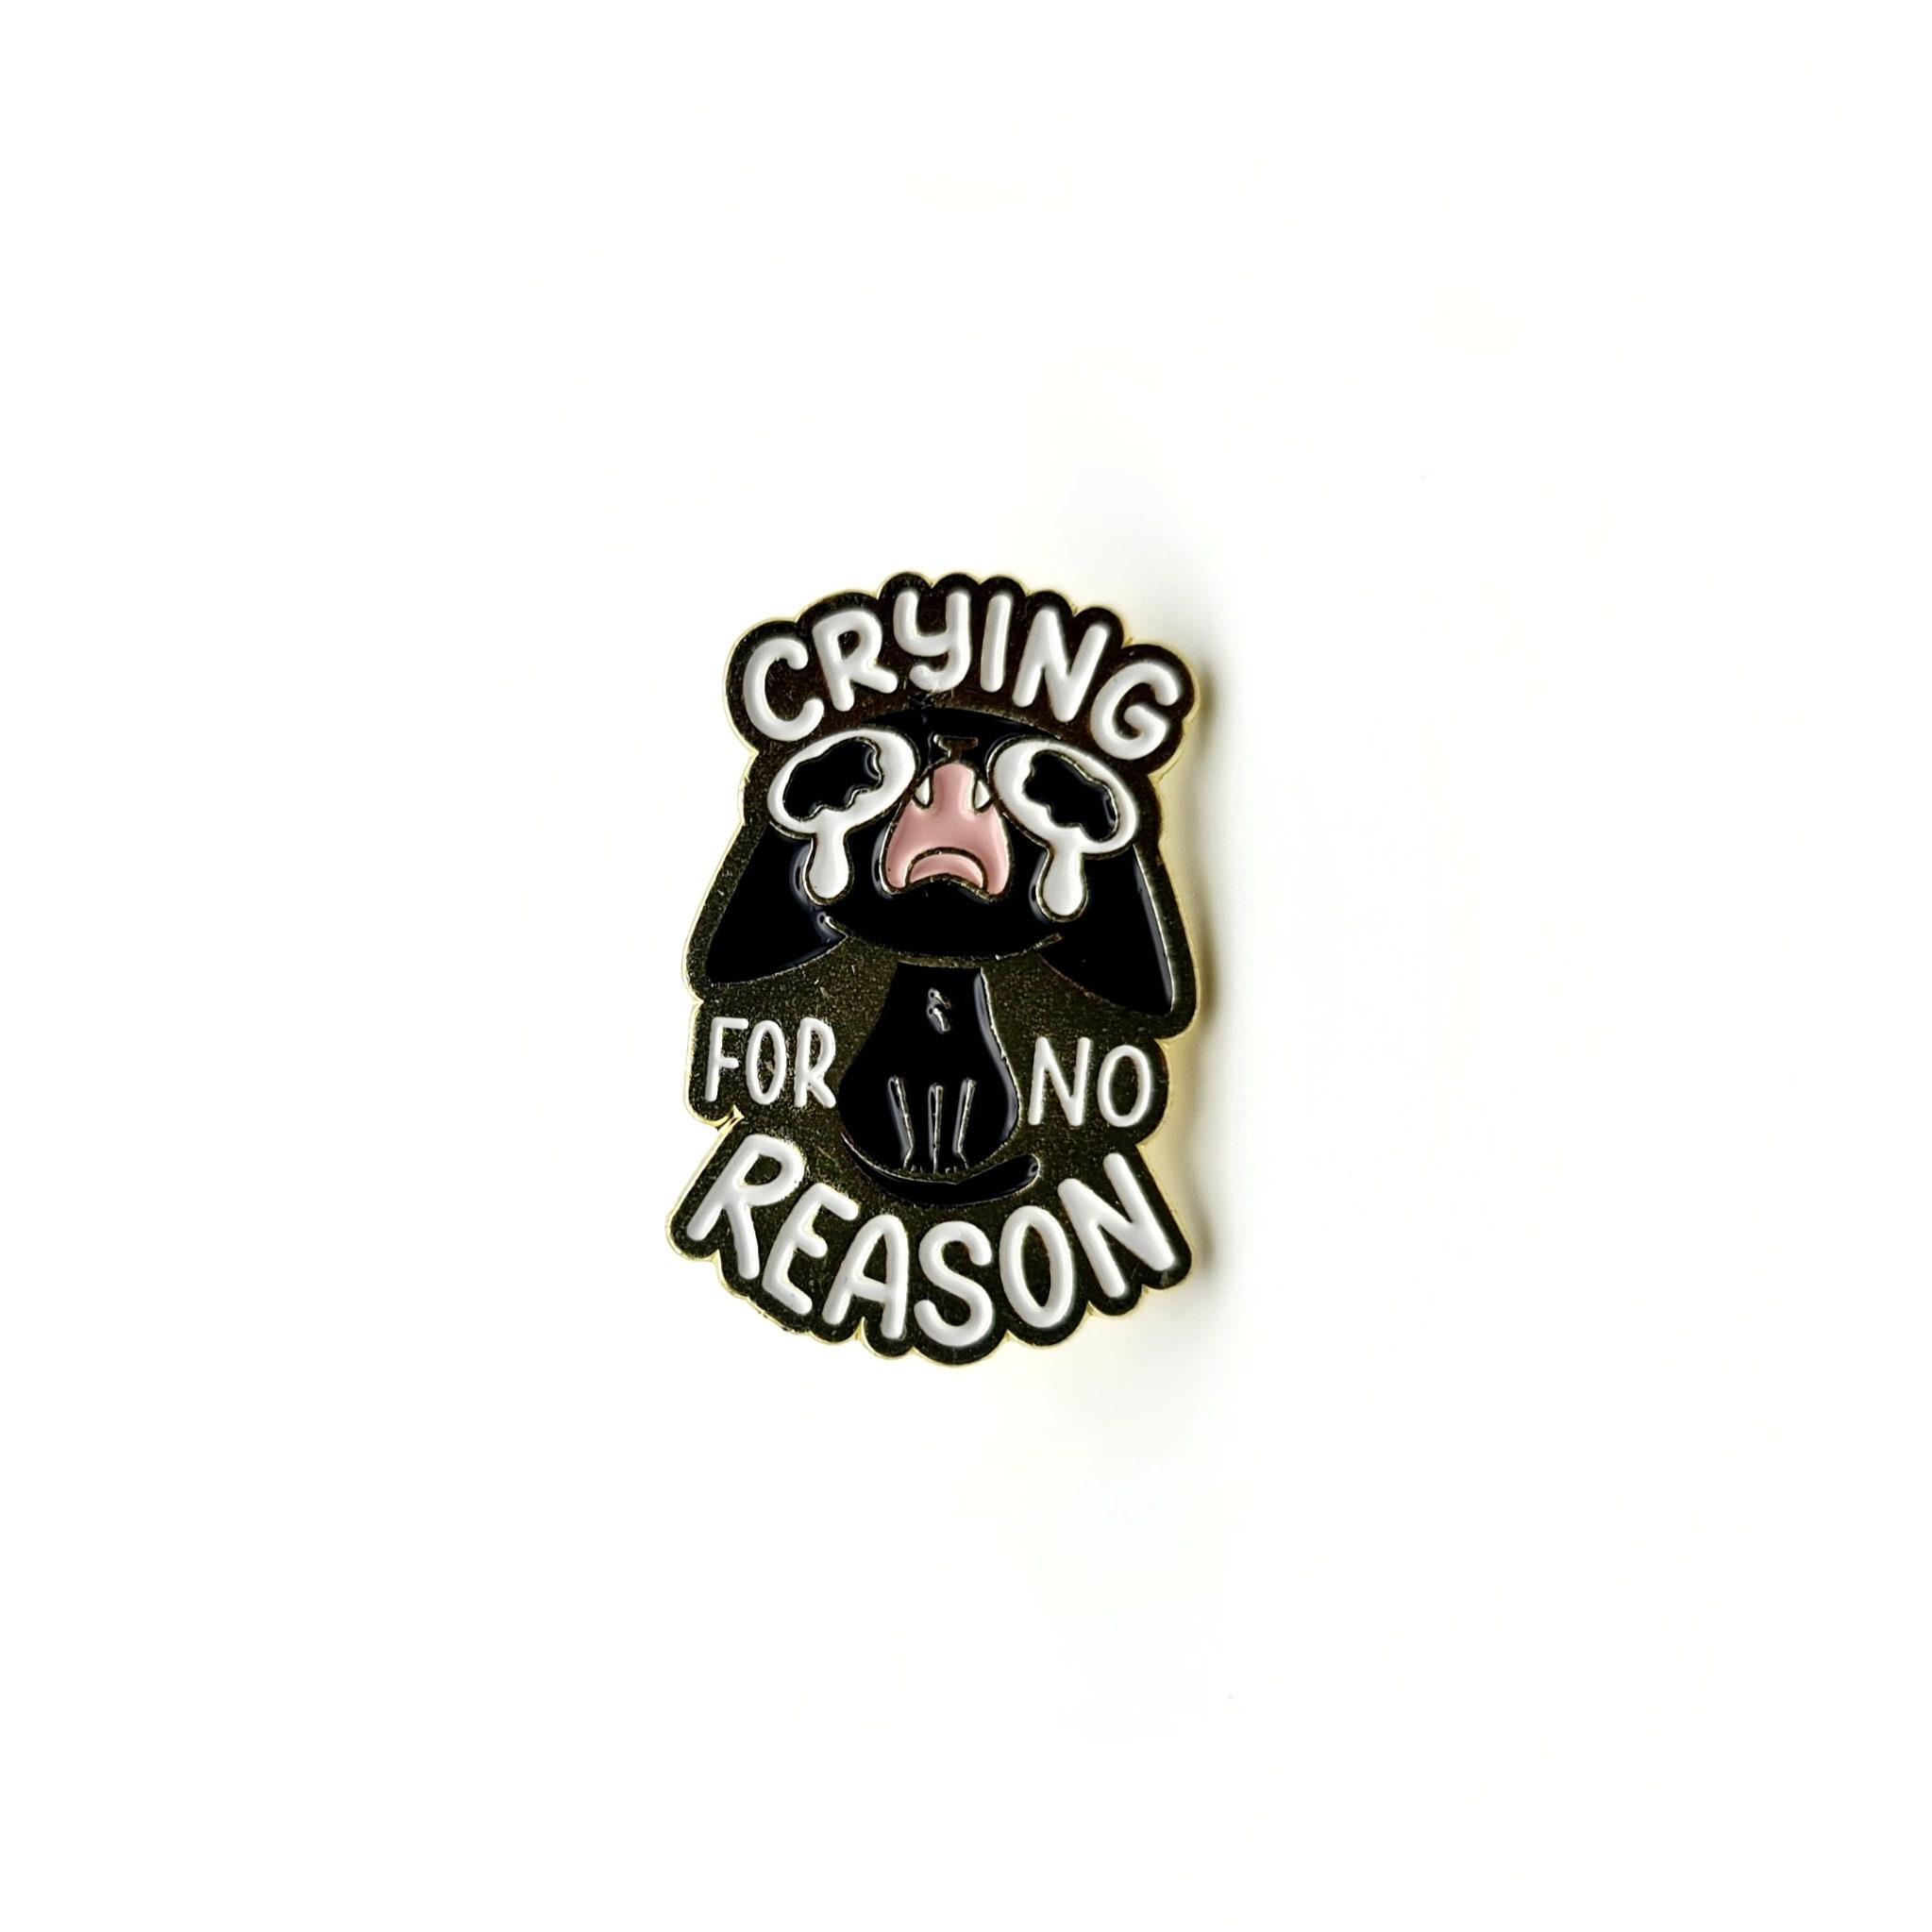 Cats Memes Chonky sad cat screaming mood pin icon in a backpack for man  woman metal brooch fashion funny badge lapel necklace decoration